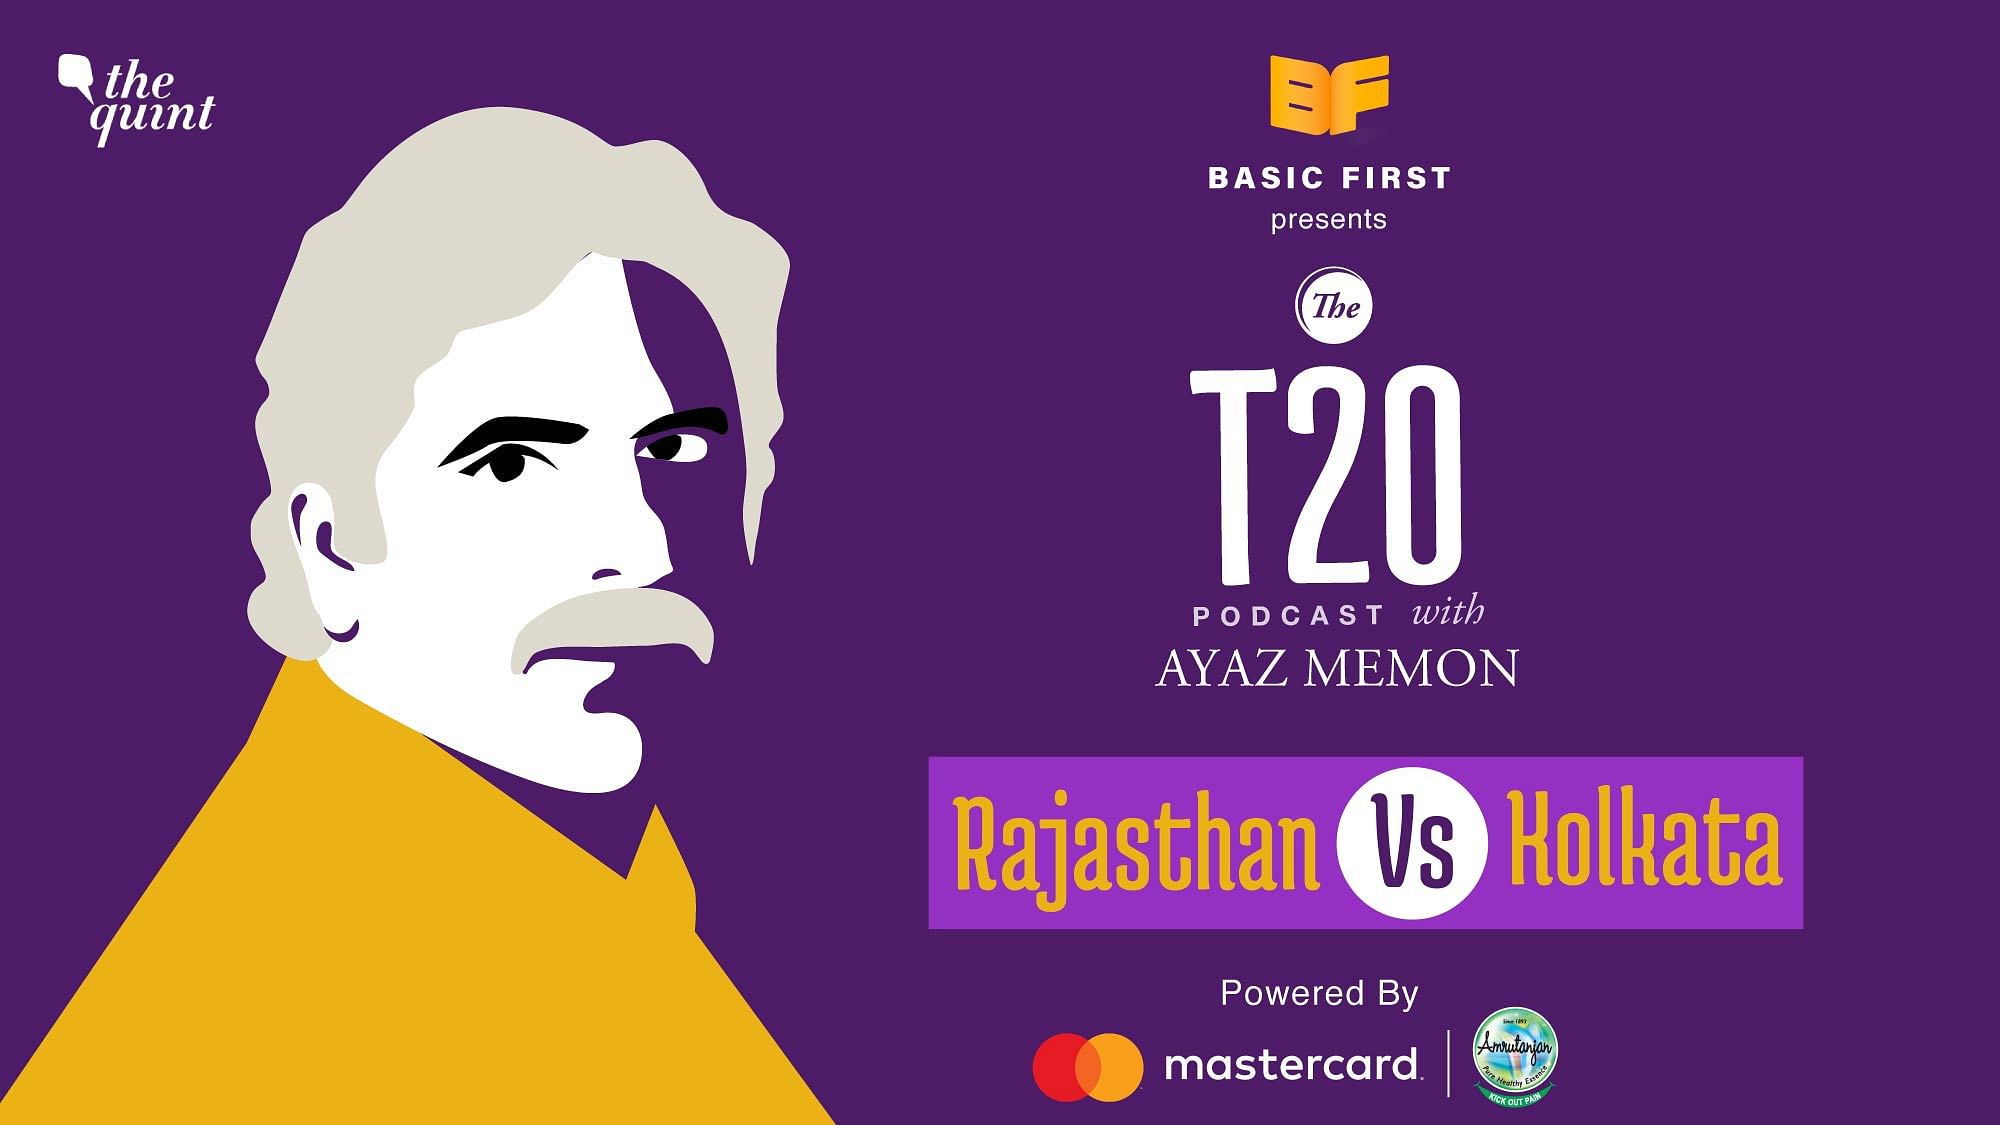 On episode 12 of The T20 Podcast, Ajaz Memon and I talk about Kolkata’s 37-run comprehensive victory over Rajasthan.